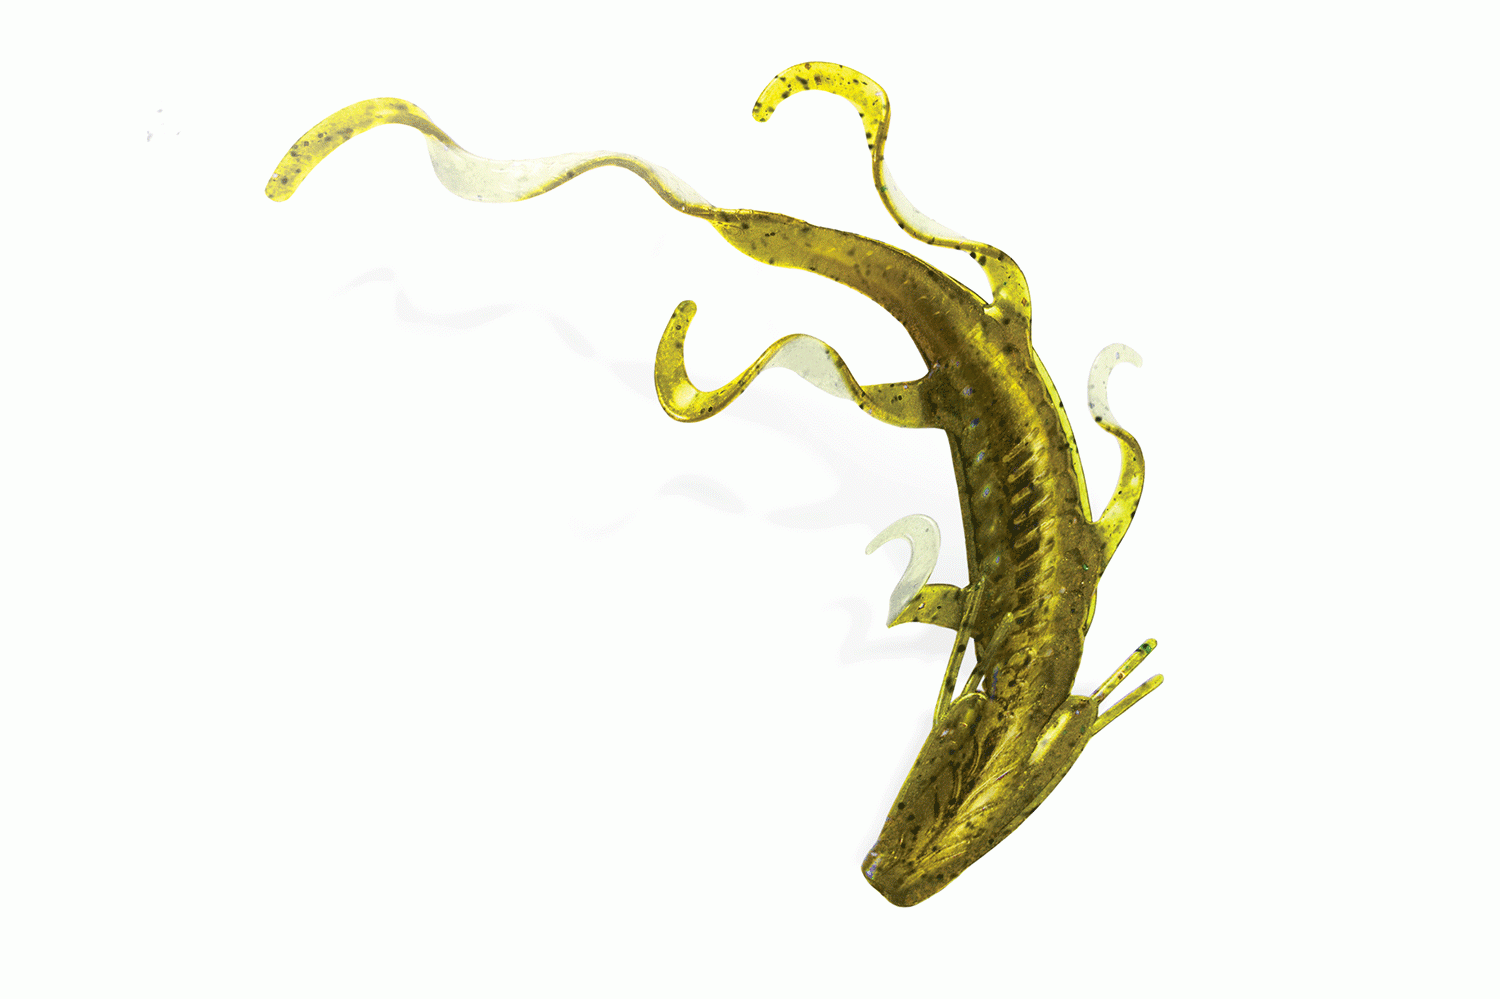 <p><b>Culprit Water Dragon, $5.29</b></p> The Water Dragon is designed to impress. From head to tail and with form, function and many more action-features than a standard lizard. First the head is designed with gills and gill filaments for a new look and extra gliding function on Carolina rigs. The body is filled with detail and contour to make a more realistic presentation, reflecting light in many directions and breaking up the image. A lateral line is also incorporated that can be easily adapted with a marker-style pen for added color along with a large flat spot on the tail.<br> <a href=